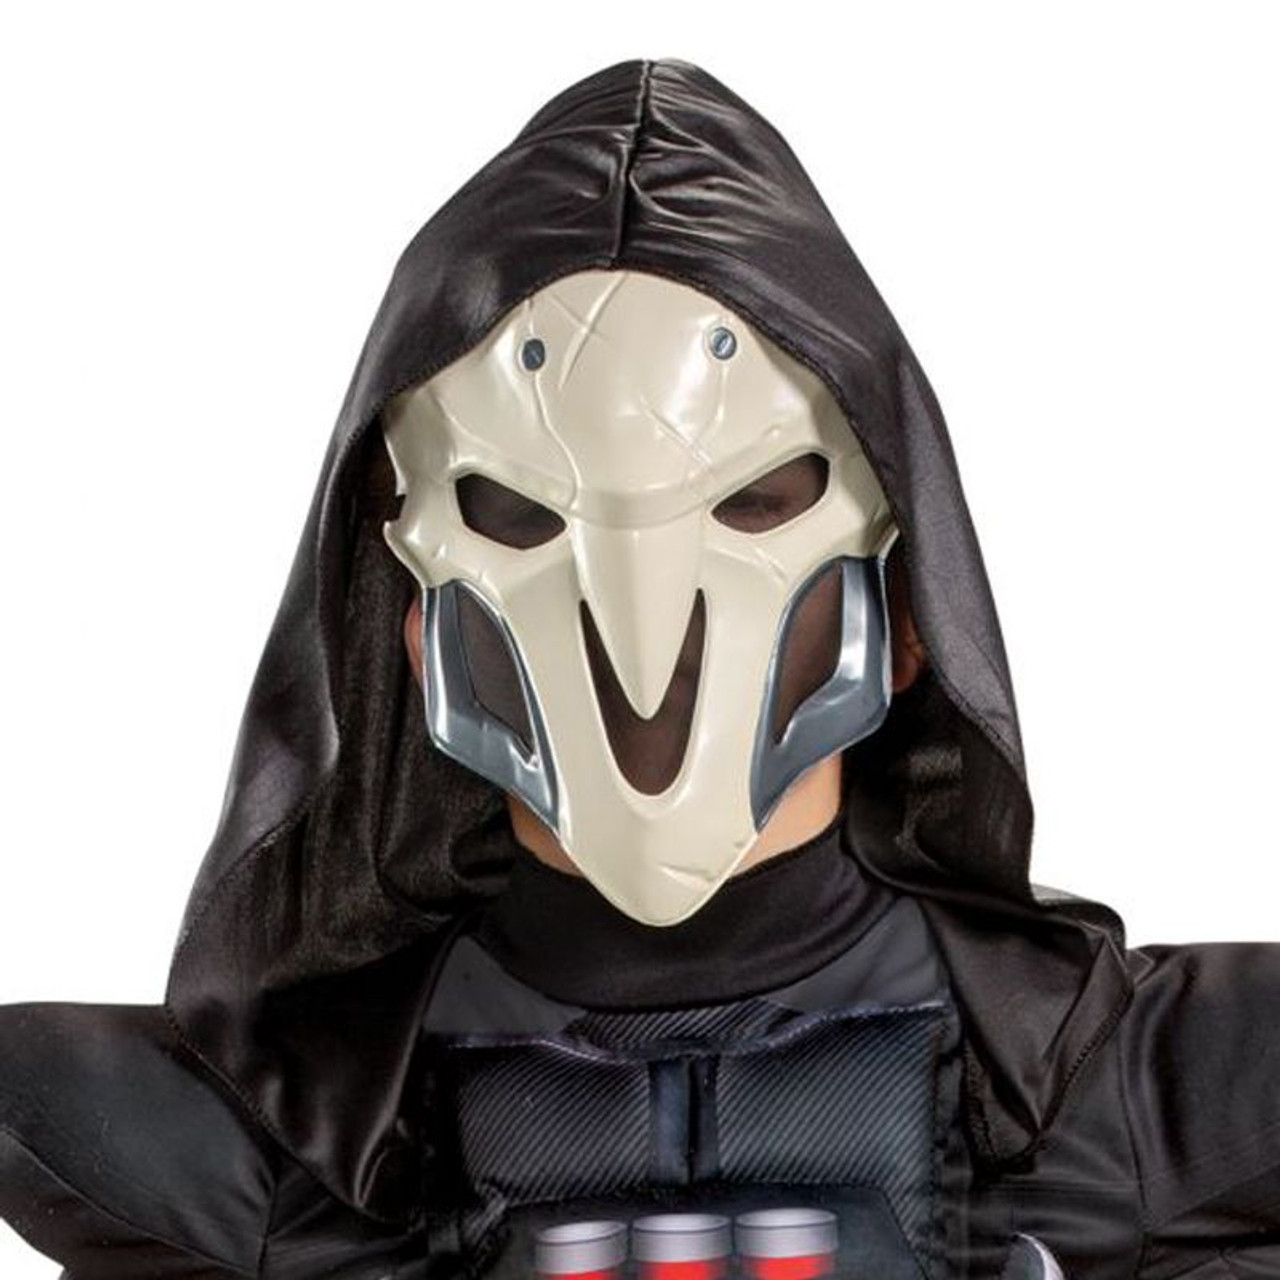 Kids Overwatch Reaper Muscle Costume - inset3